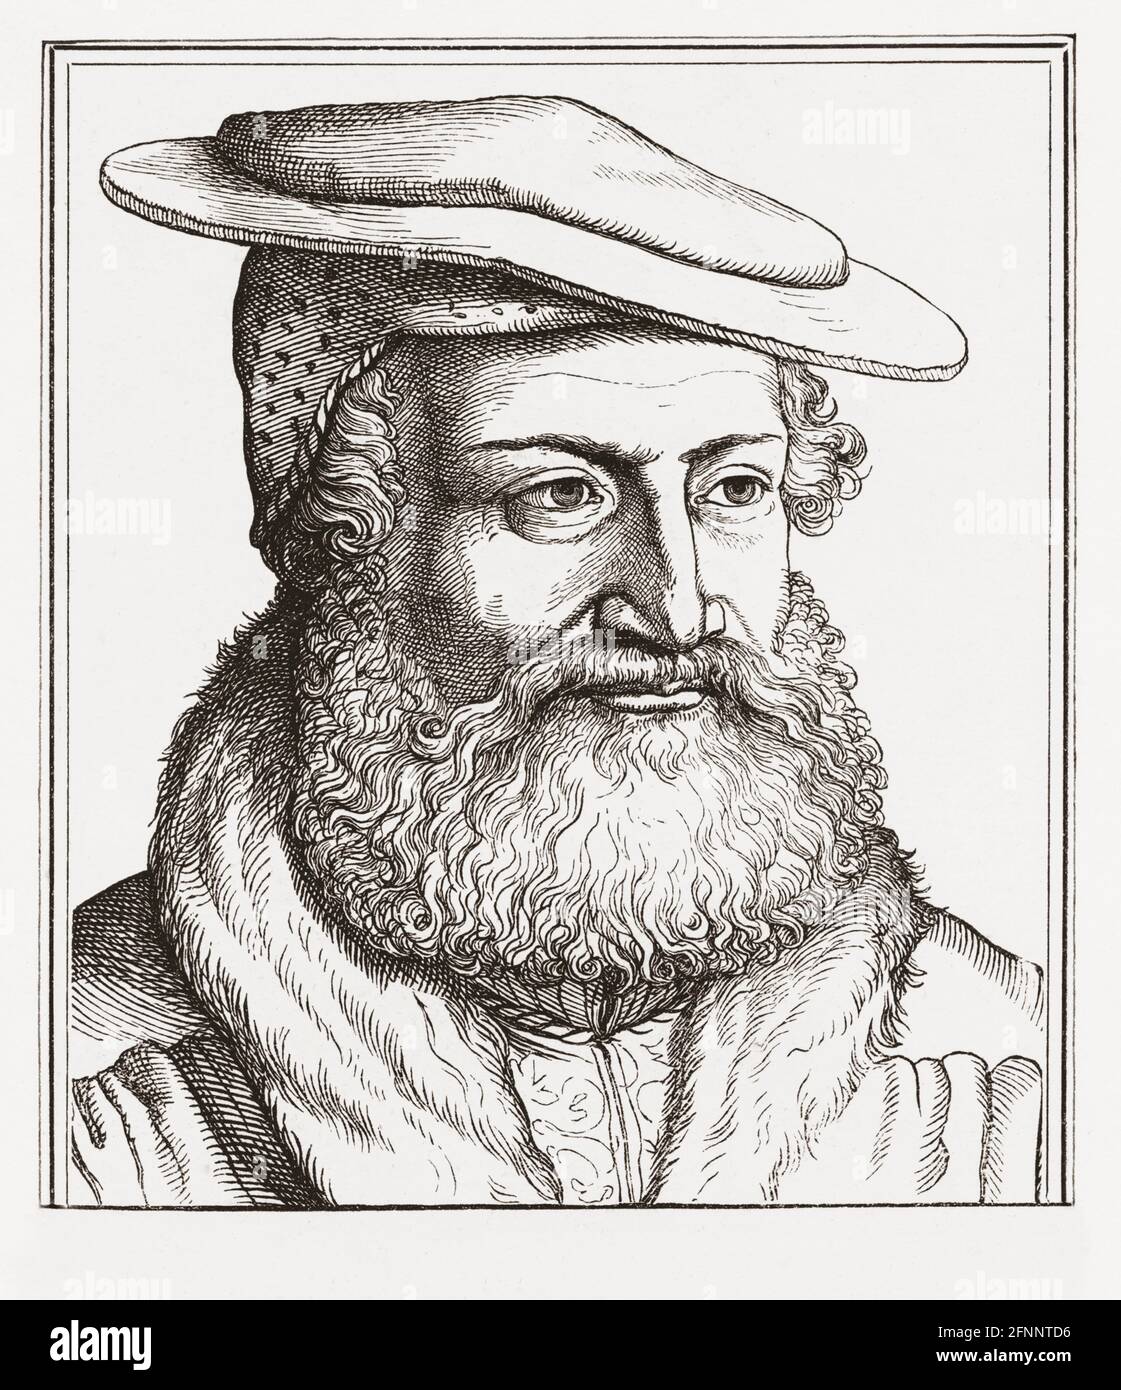 Hans Sachs, 1494 - 1576.  German Meistersinger, or Master singer, poet and playwright.  Meistersingers were members of a German guild with set rules for certain of the performing arts. After a wood engraving by Michael Ostendorfer. Stock Photo